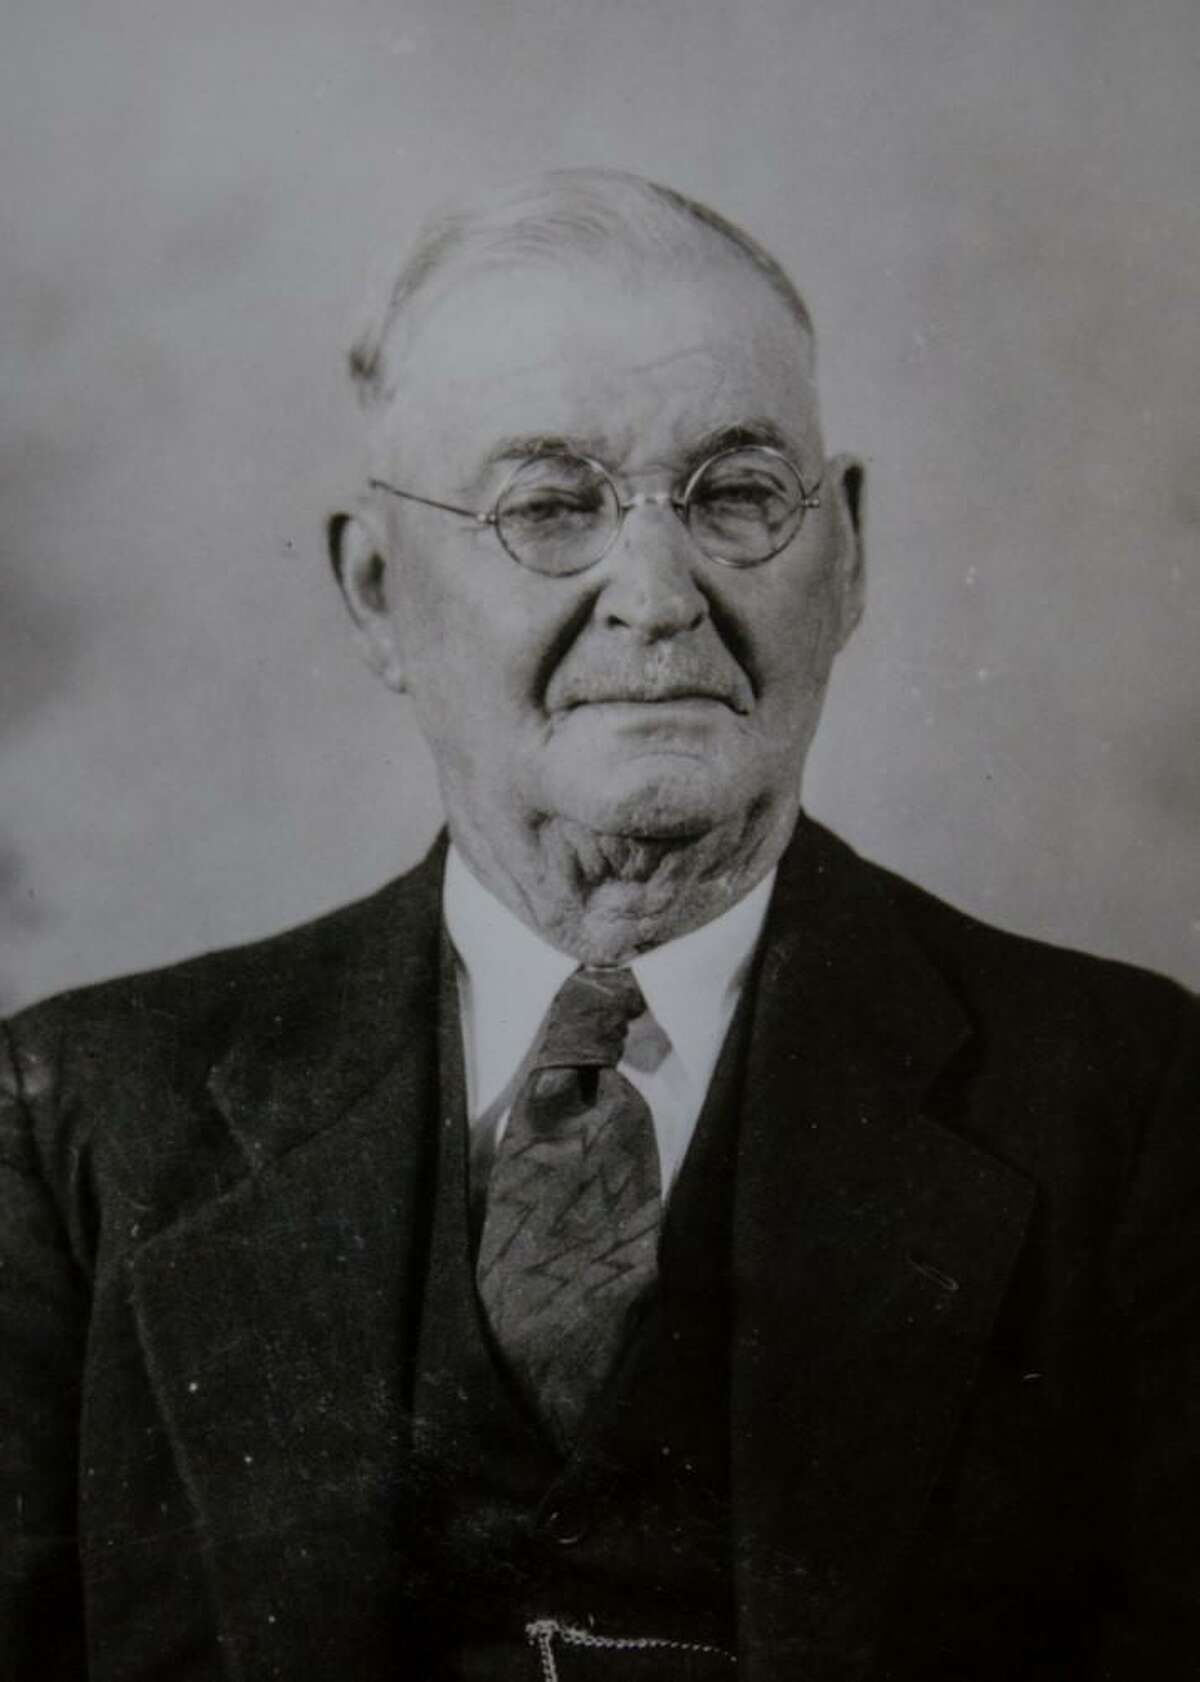 Hugh Benjamin Hicks was the Montgomery County Sheriff from 1920 to 1933. His family lived in the house that is now used by the Conroe Service League as The Bargain Box resale shop.